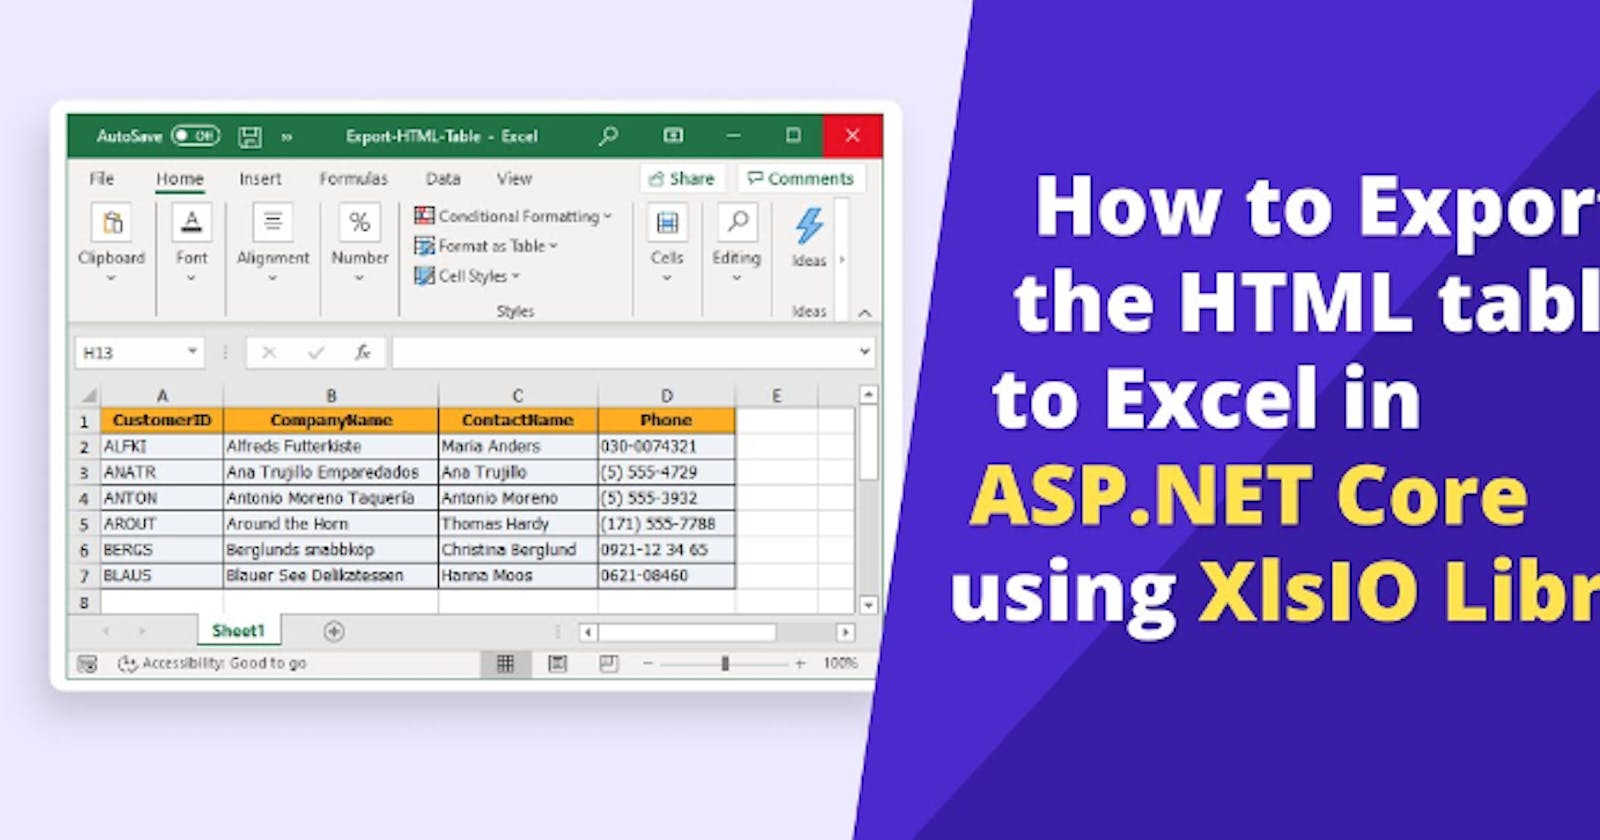 How to Export HTML Table to Excel in ASP.NET Core using the XlsIO Library